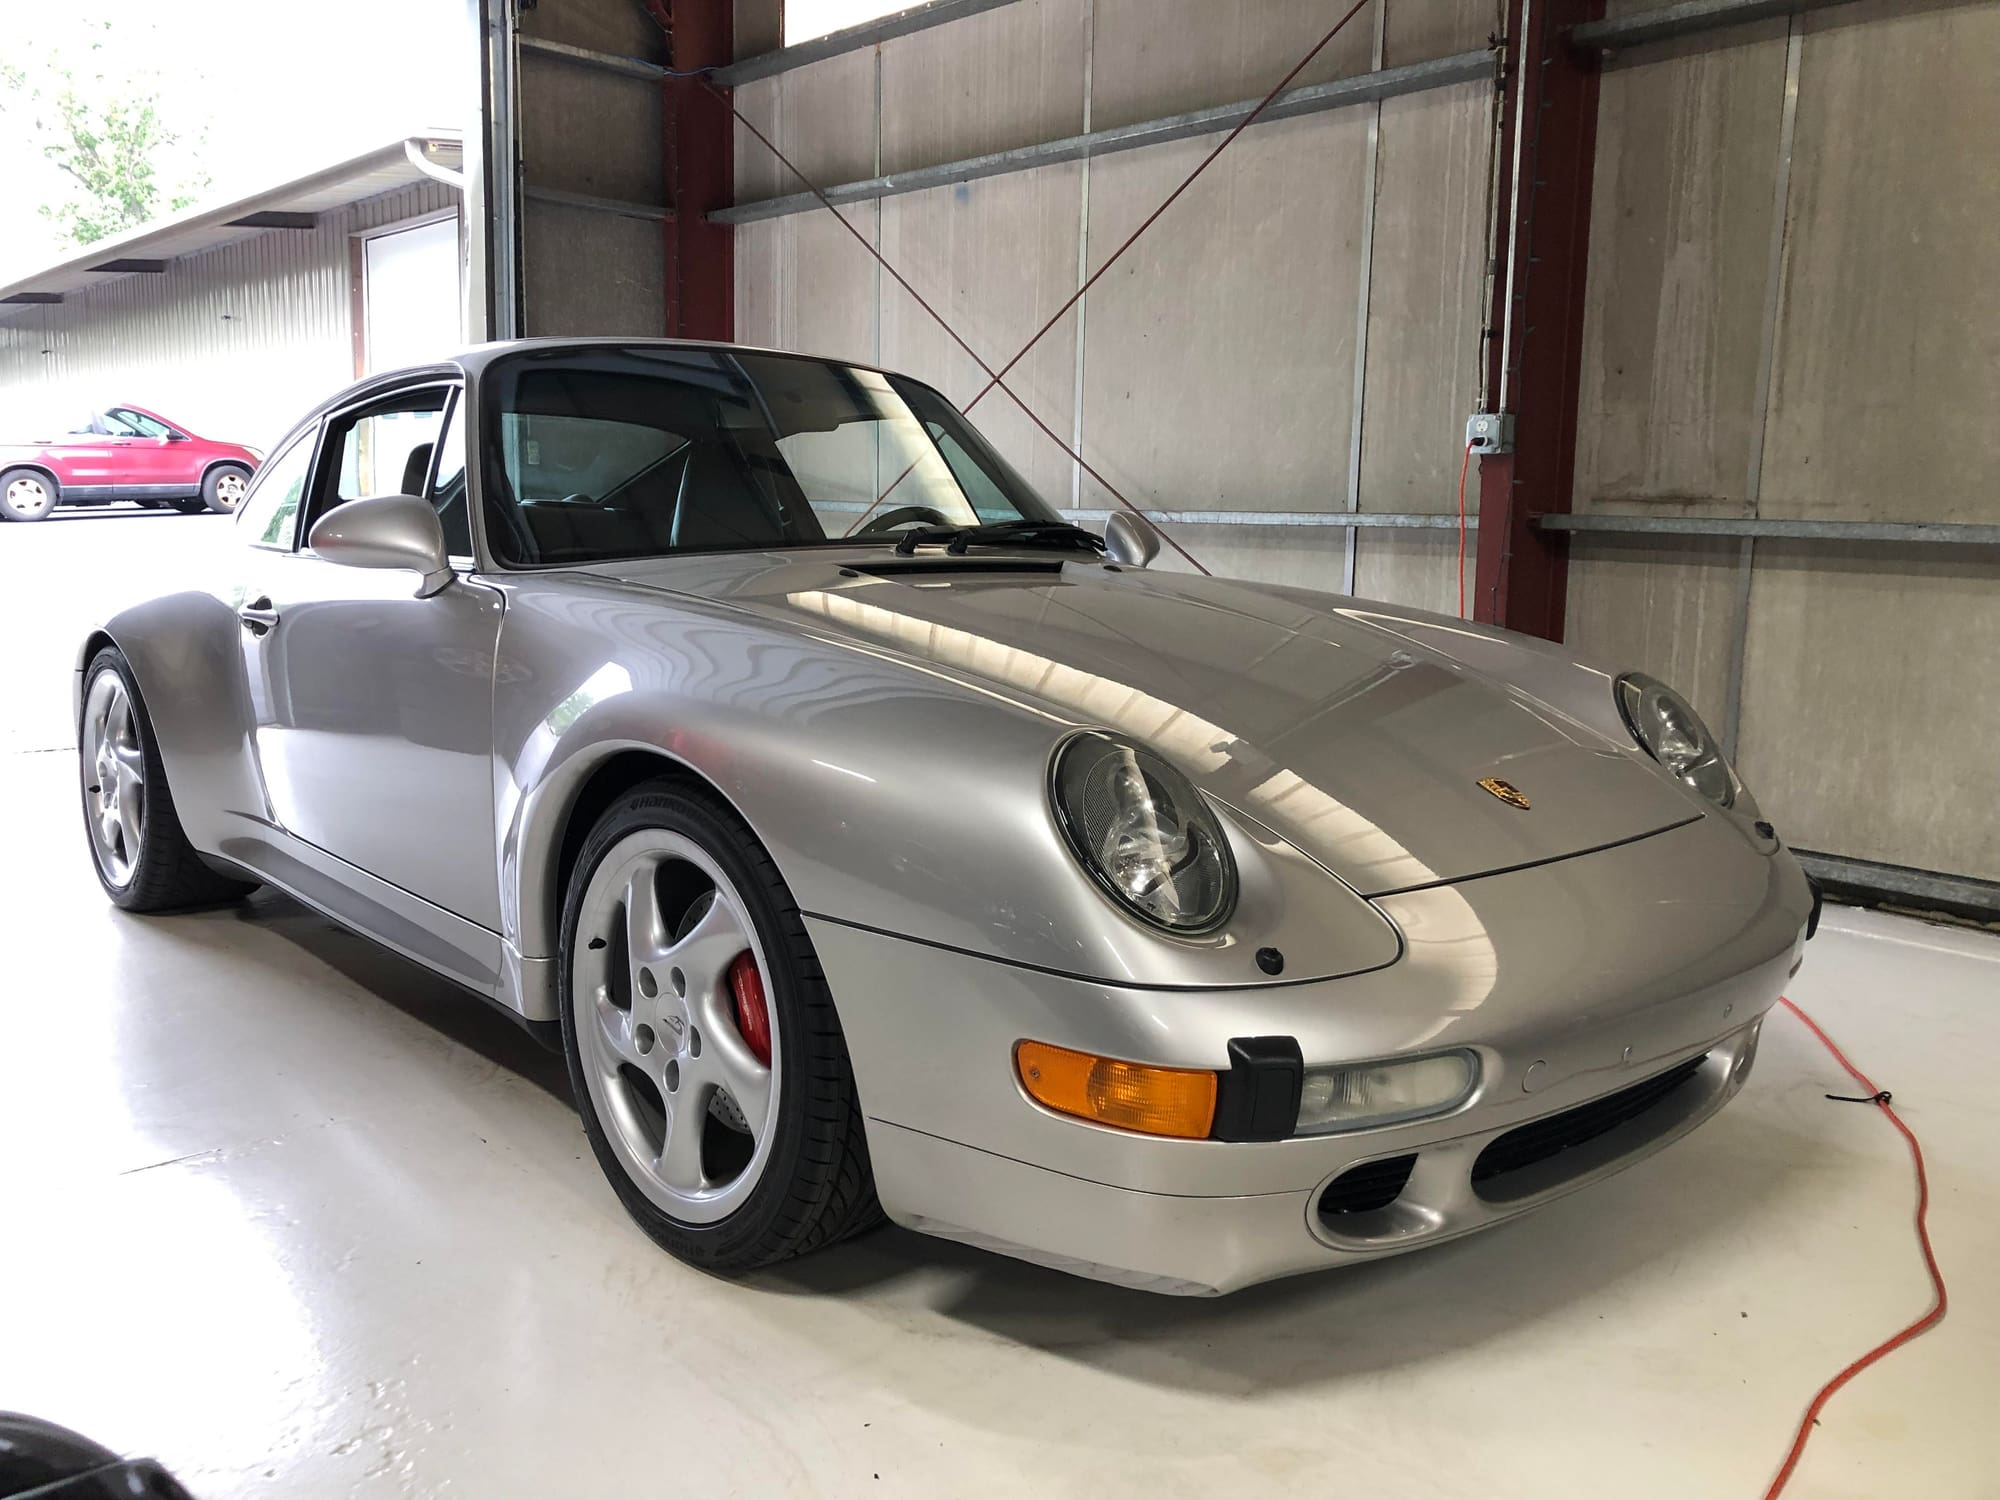 1997 Porsche 911 - Pristine 1997 993 C4S for sale - Used - VIN 1997 993 C4S - 35,010 Miles - 6 cyl - AWD - Manual - Coupe - Silver - Lewiston, NY 14092, United States